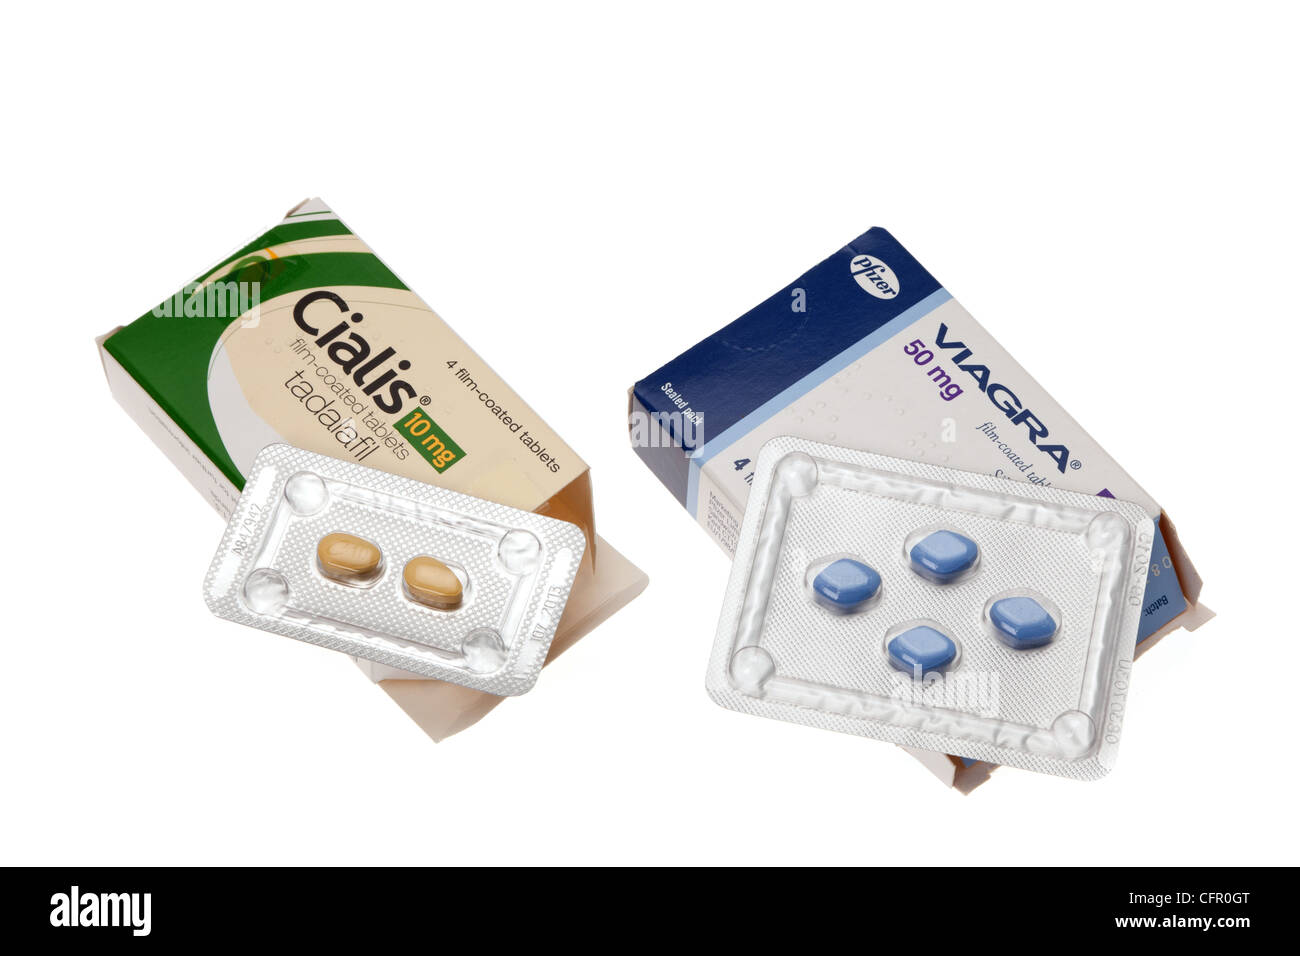 Close up on the prescription tablets Viagra and Cialis - both medications are used to treat men with an erectile dysfunction. Stock Photo